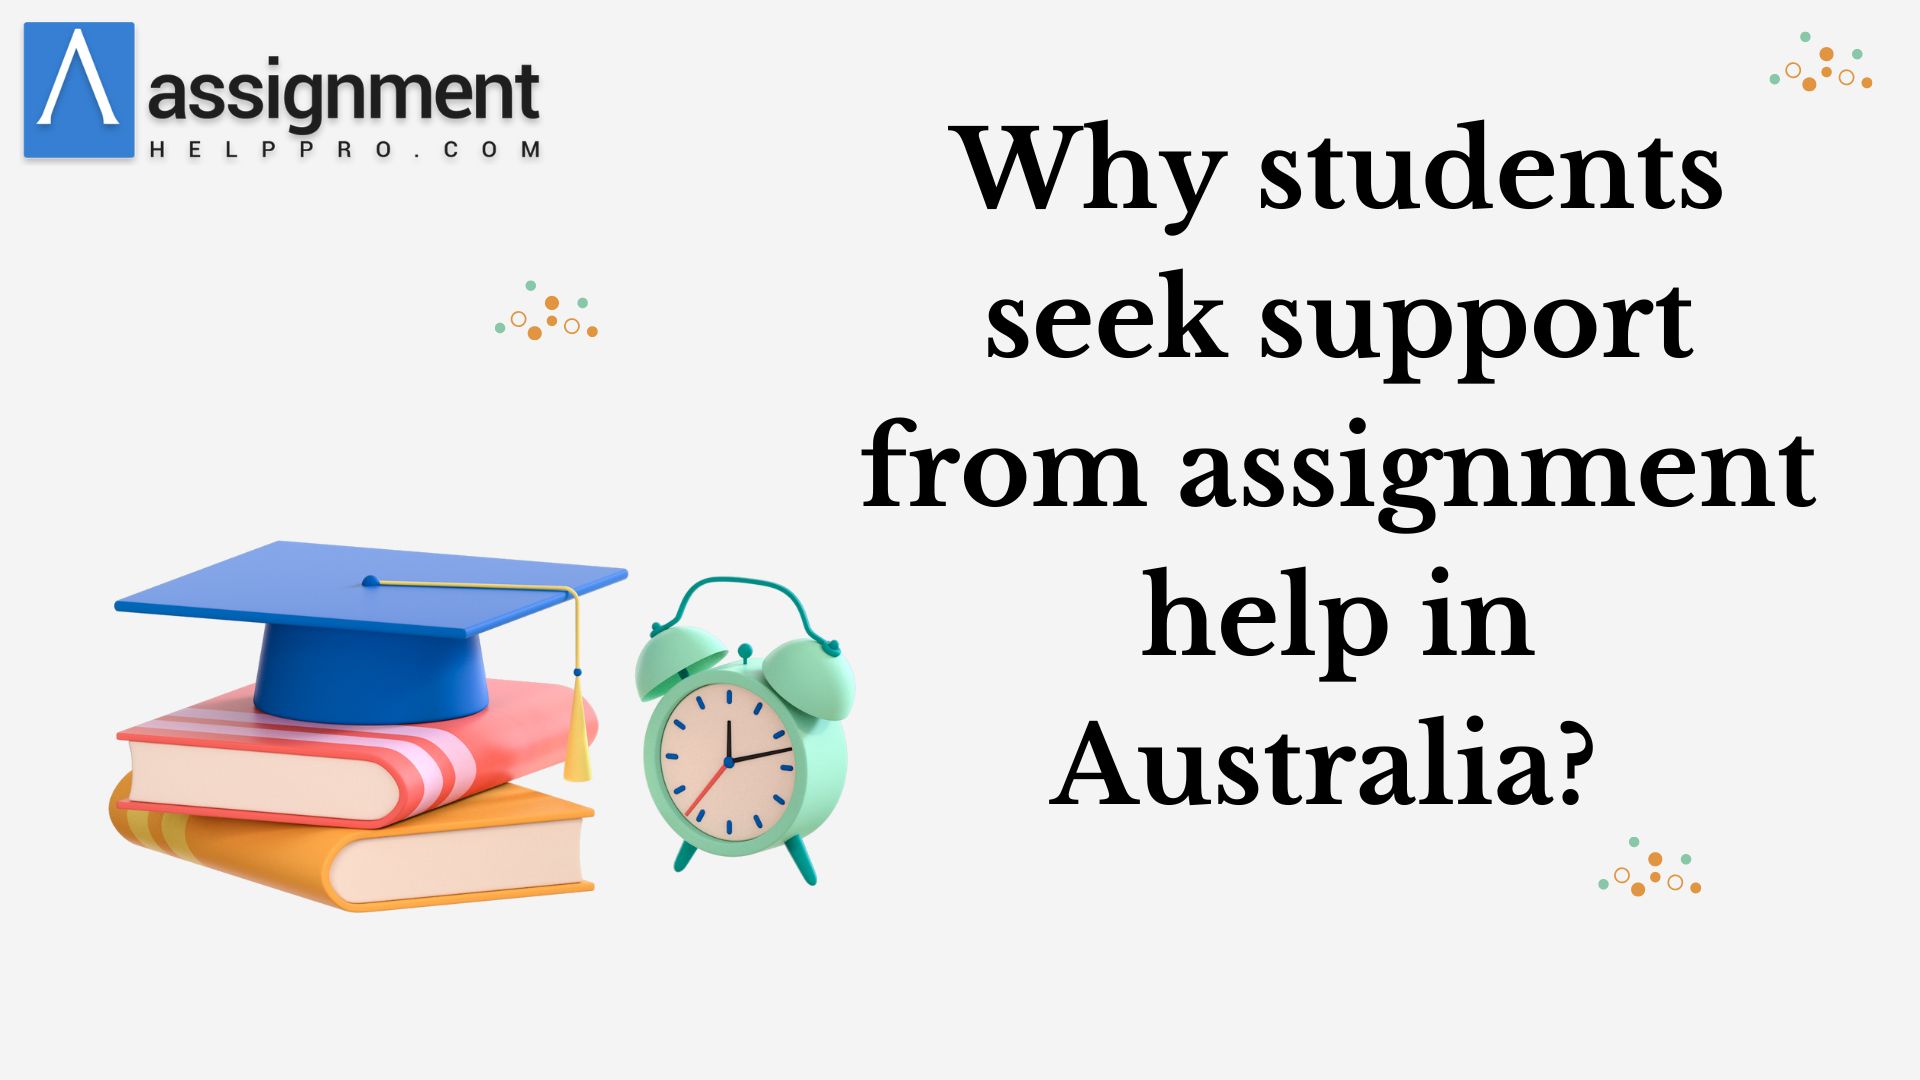 Why students seek support from assignment help in Australia? – Assignment help Australia